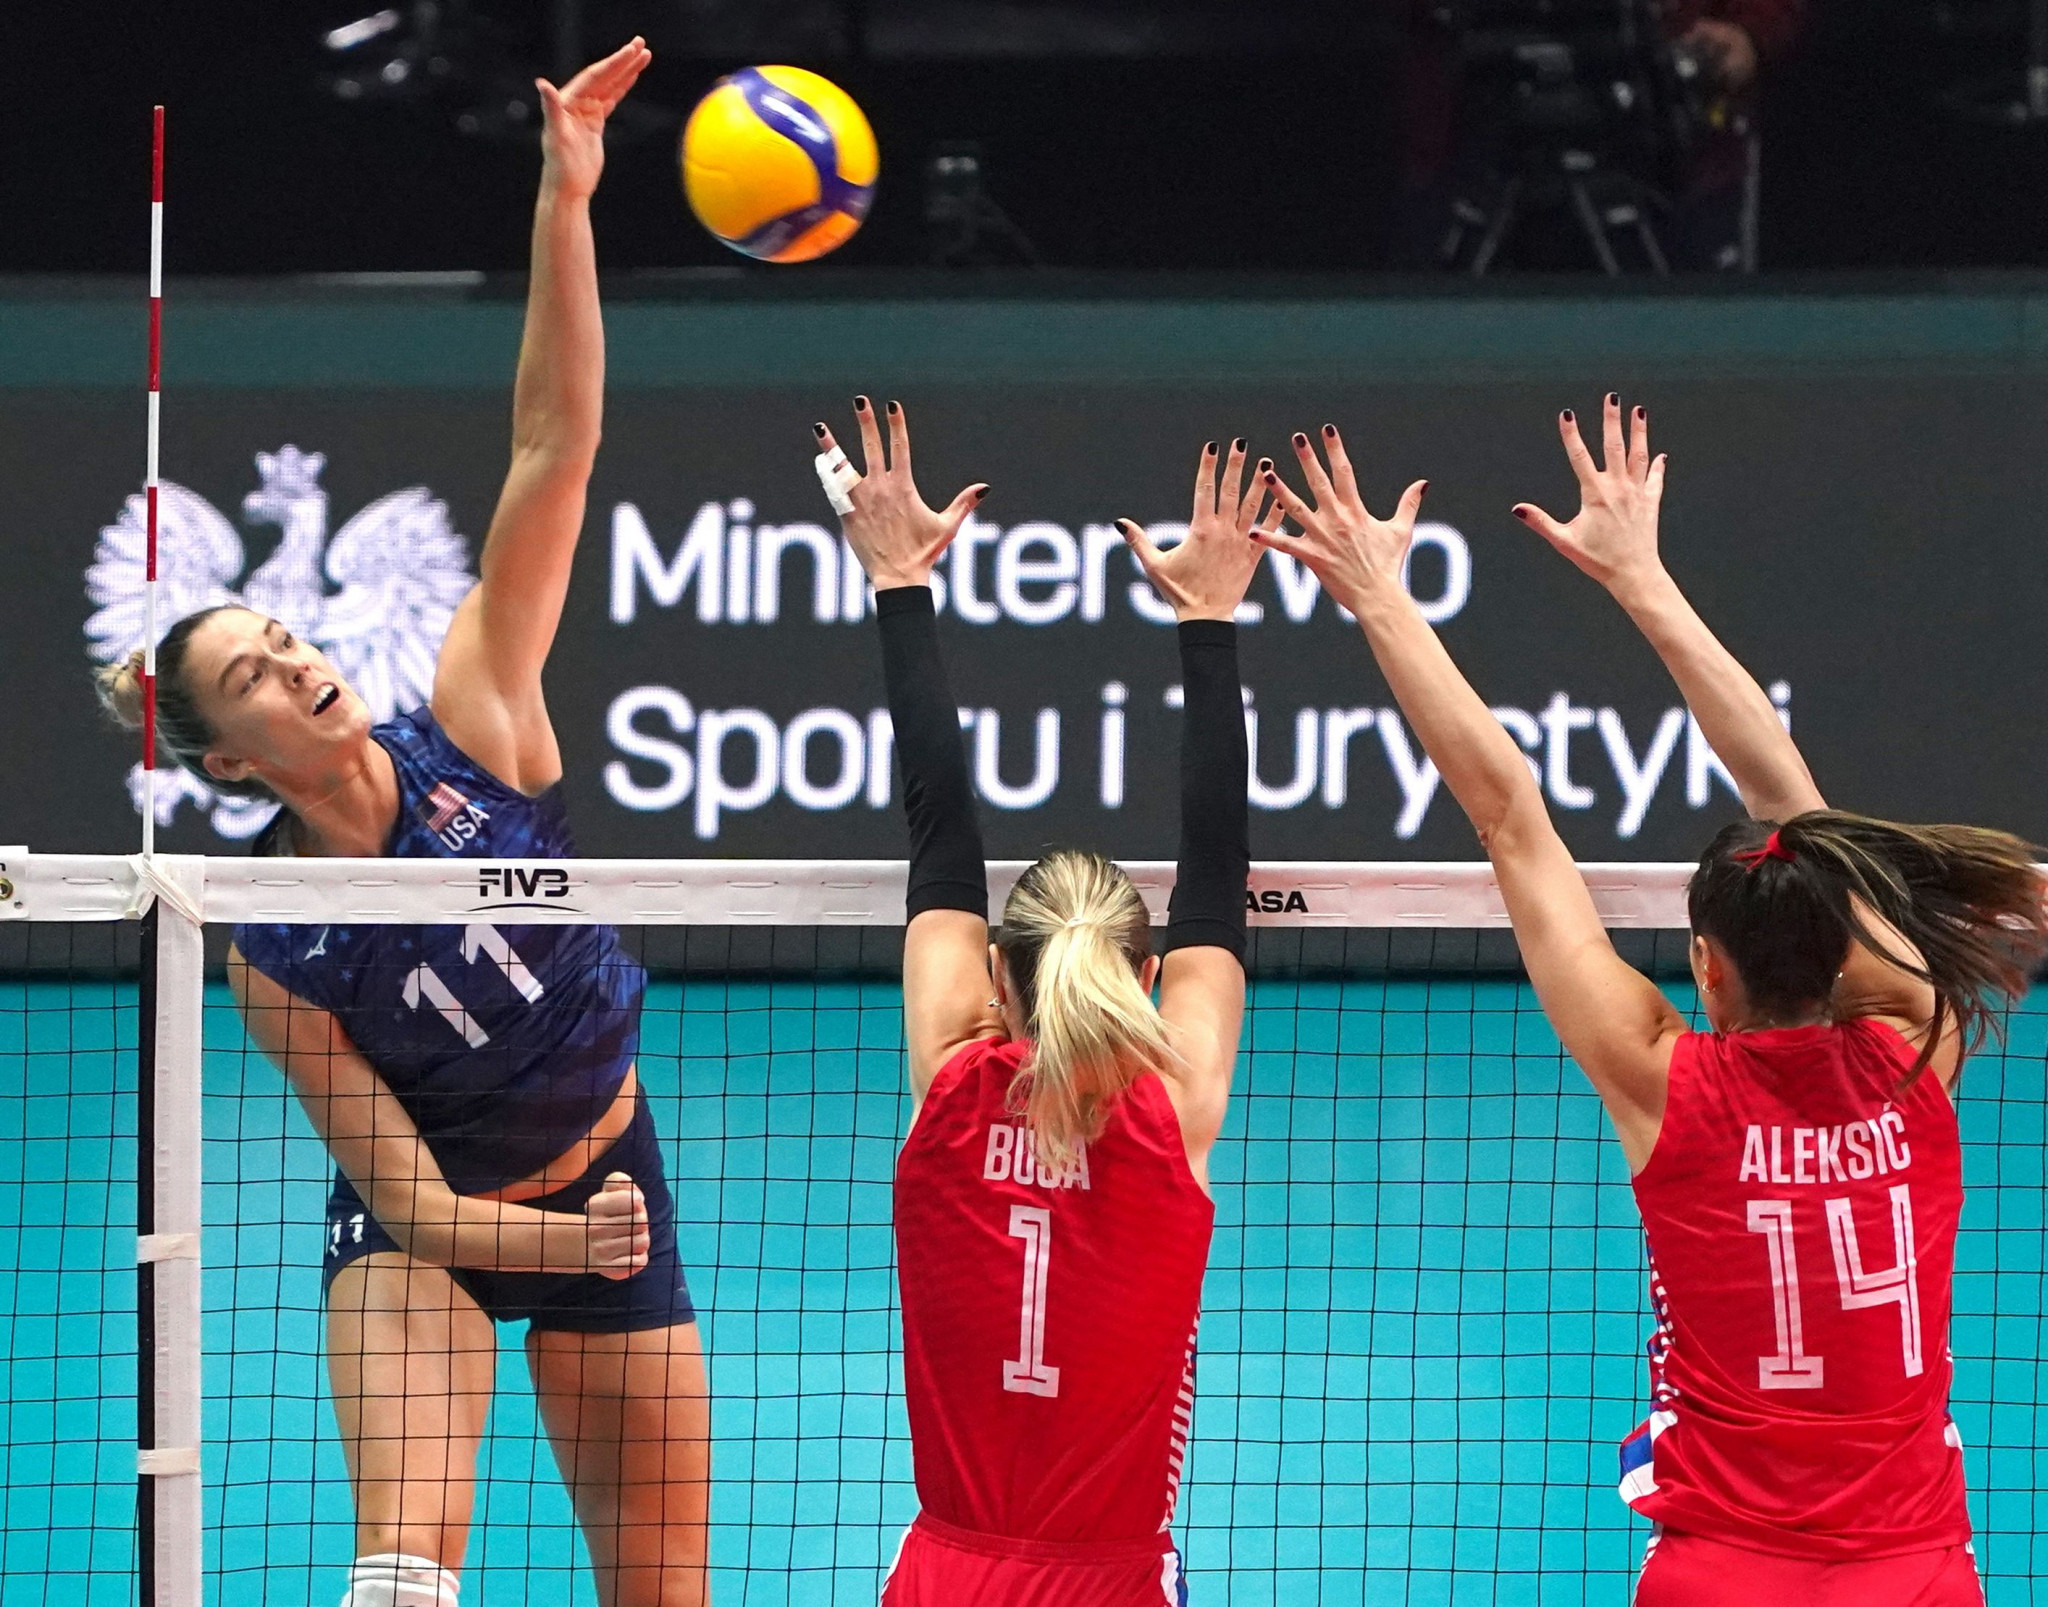 Serbia, playing in red, beat the United States in four games to reach the Women's Volleyball World Championship final ©Getty Images